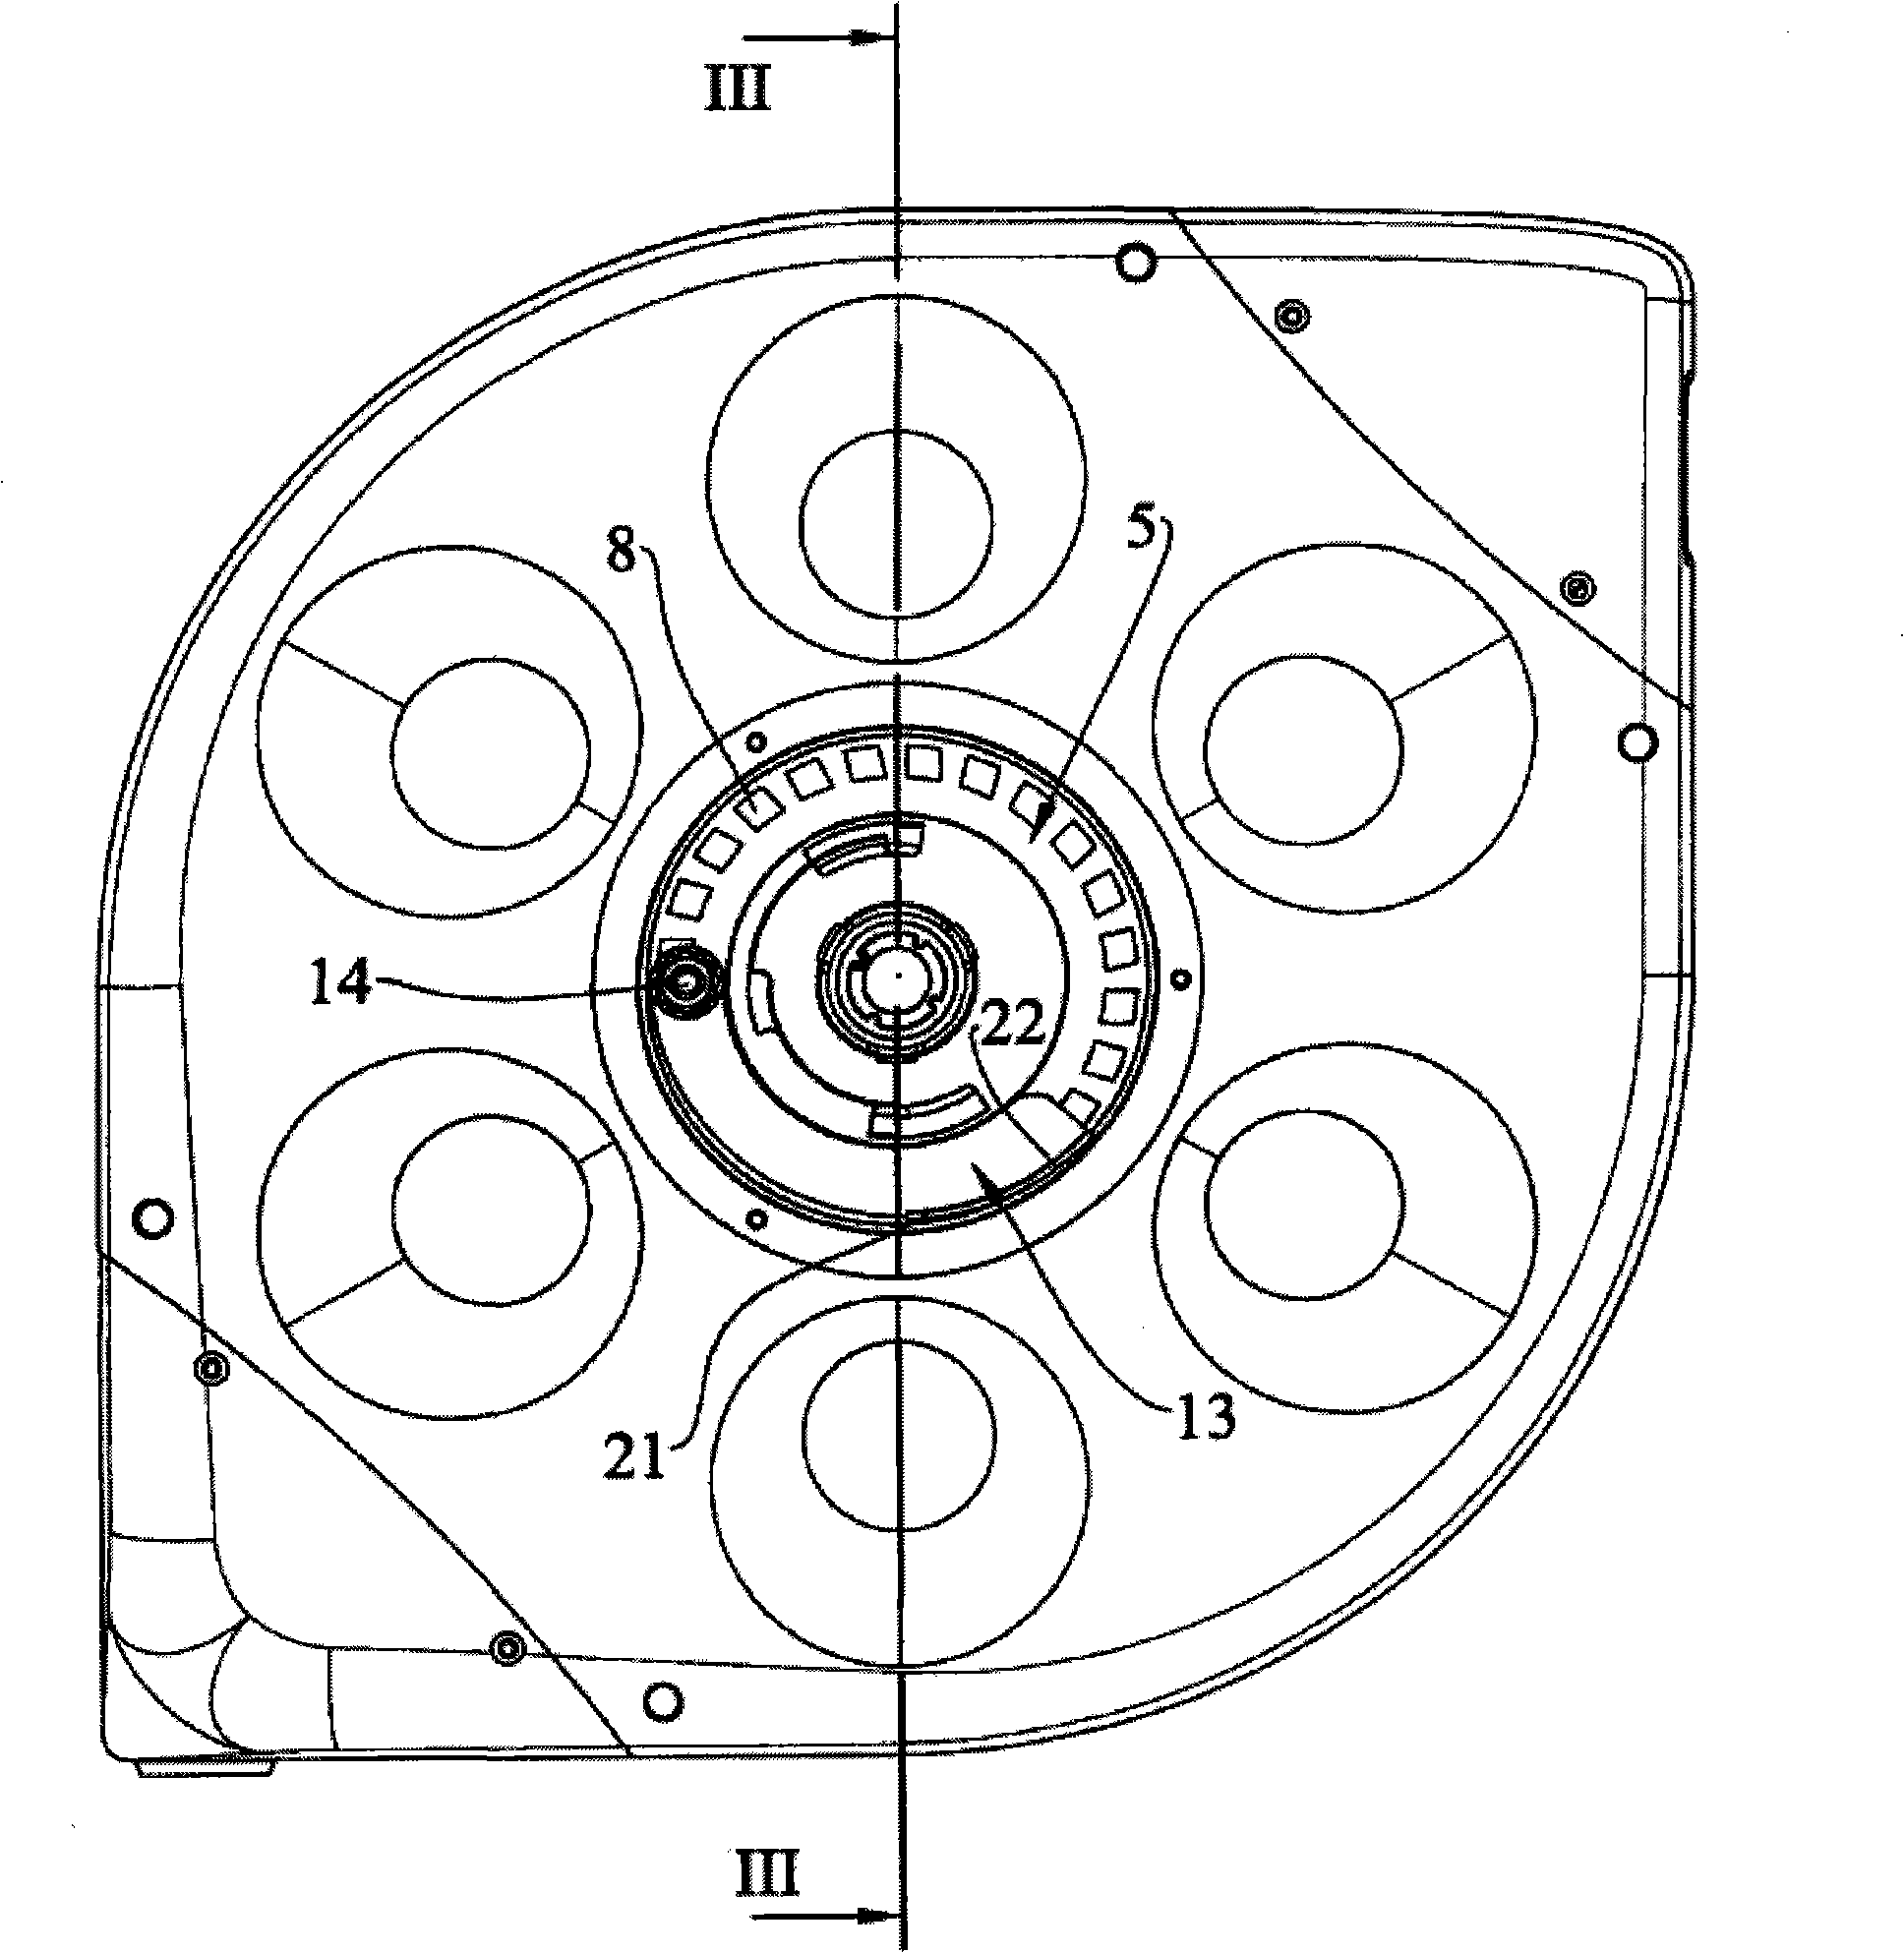 Elastic rewinding hose reel with automatic stopping device